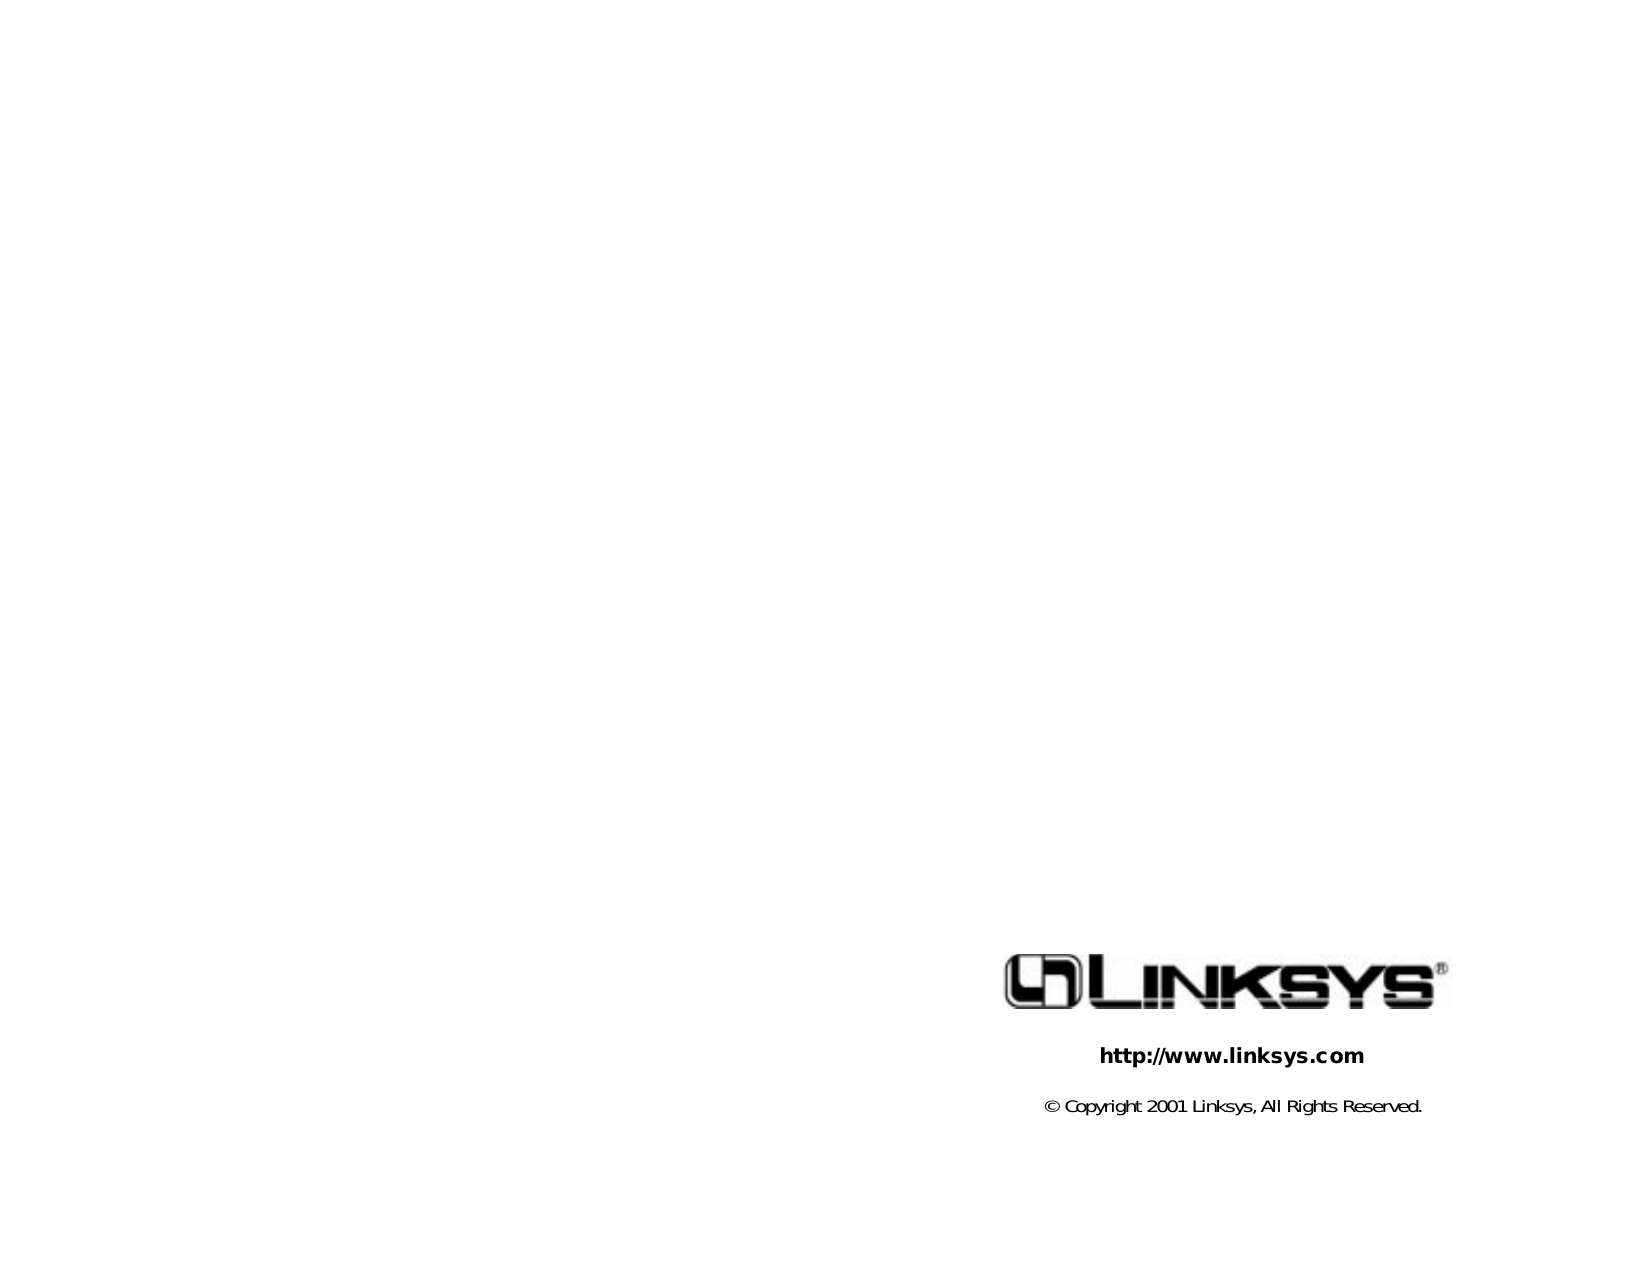 © Copyright 2001 Linksys,All Rights Reserved.http://www.linksys.com